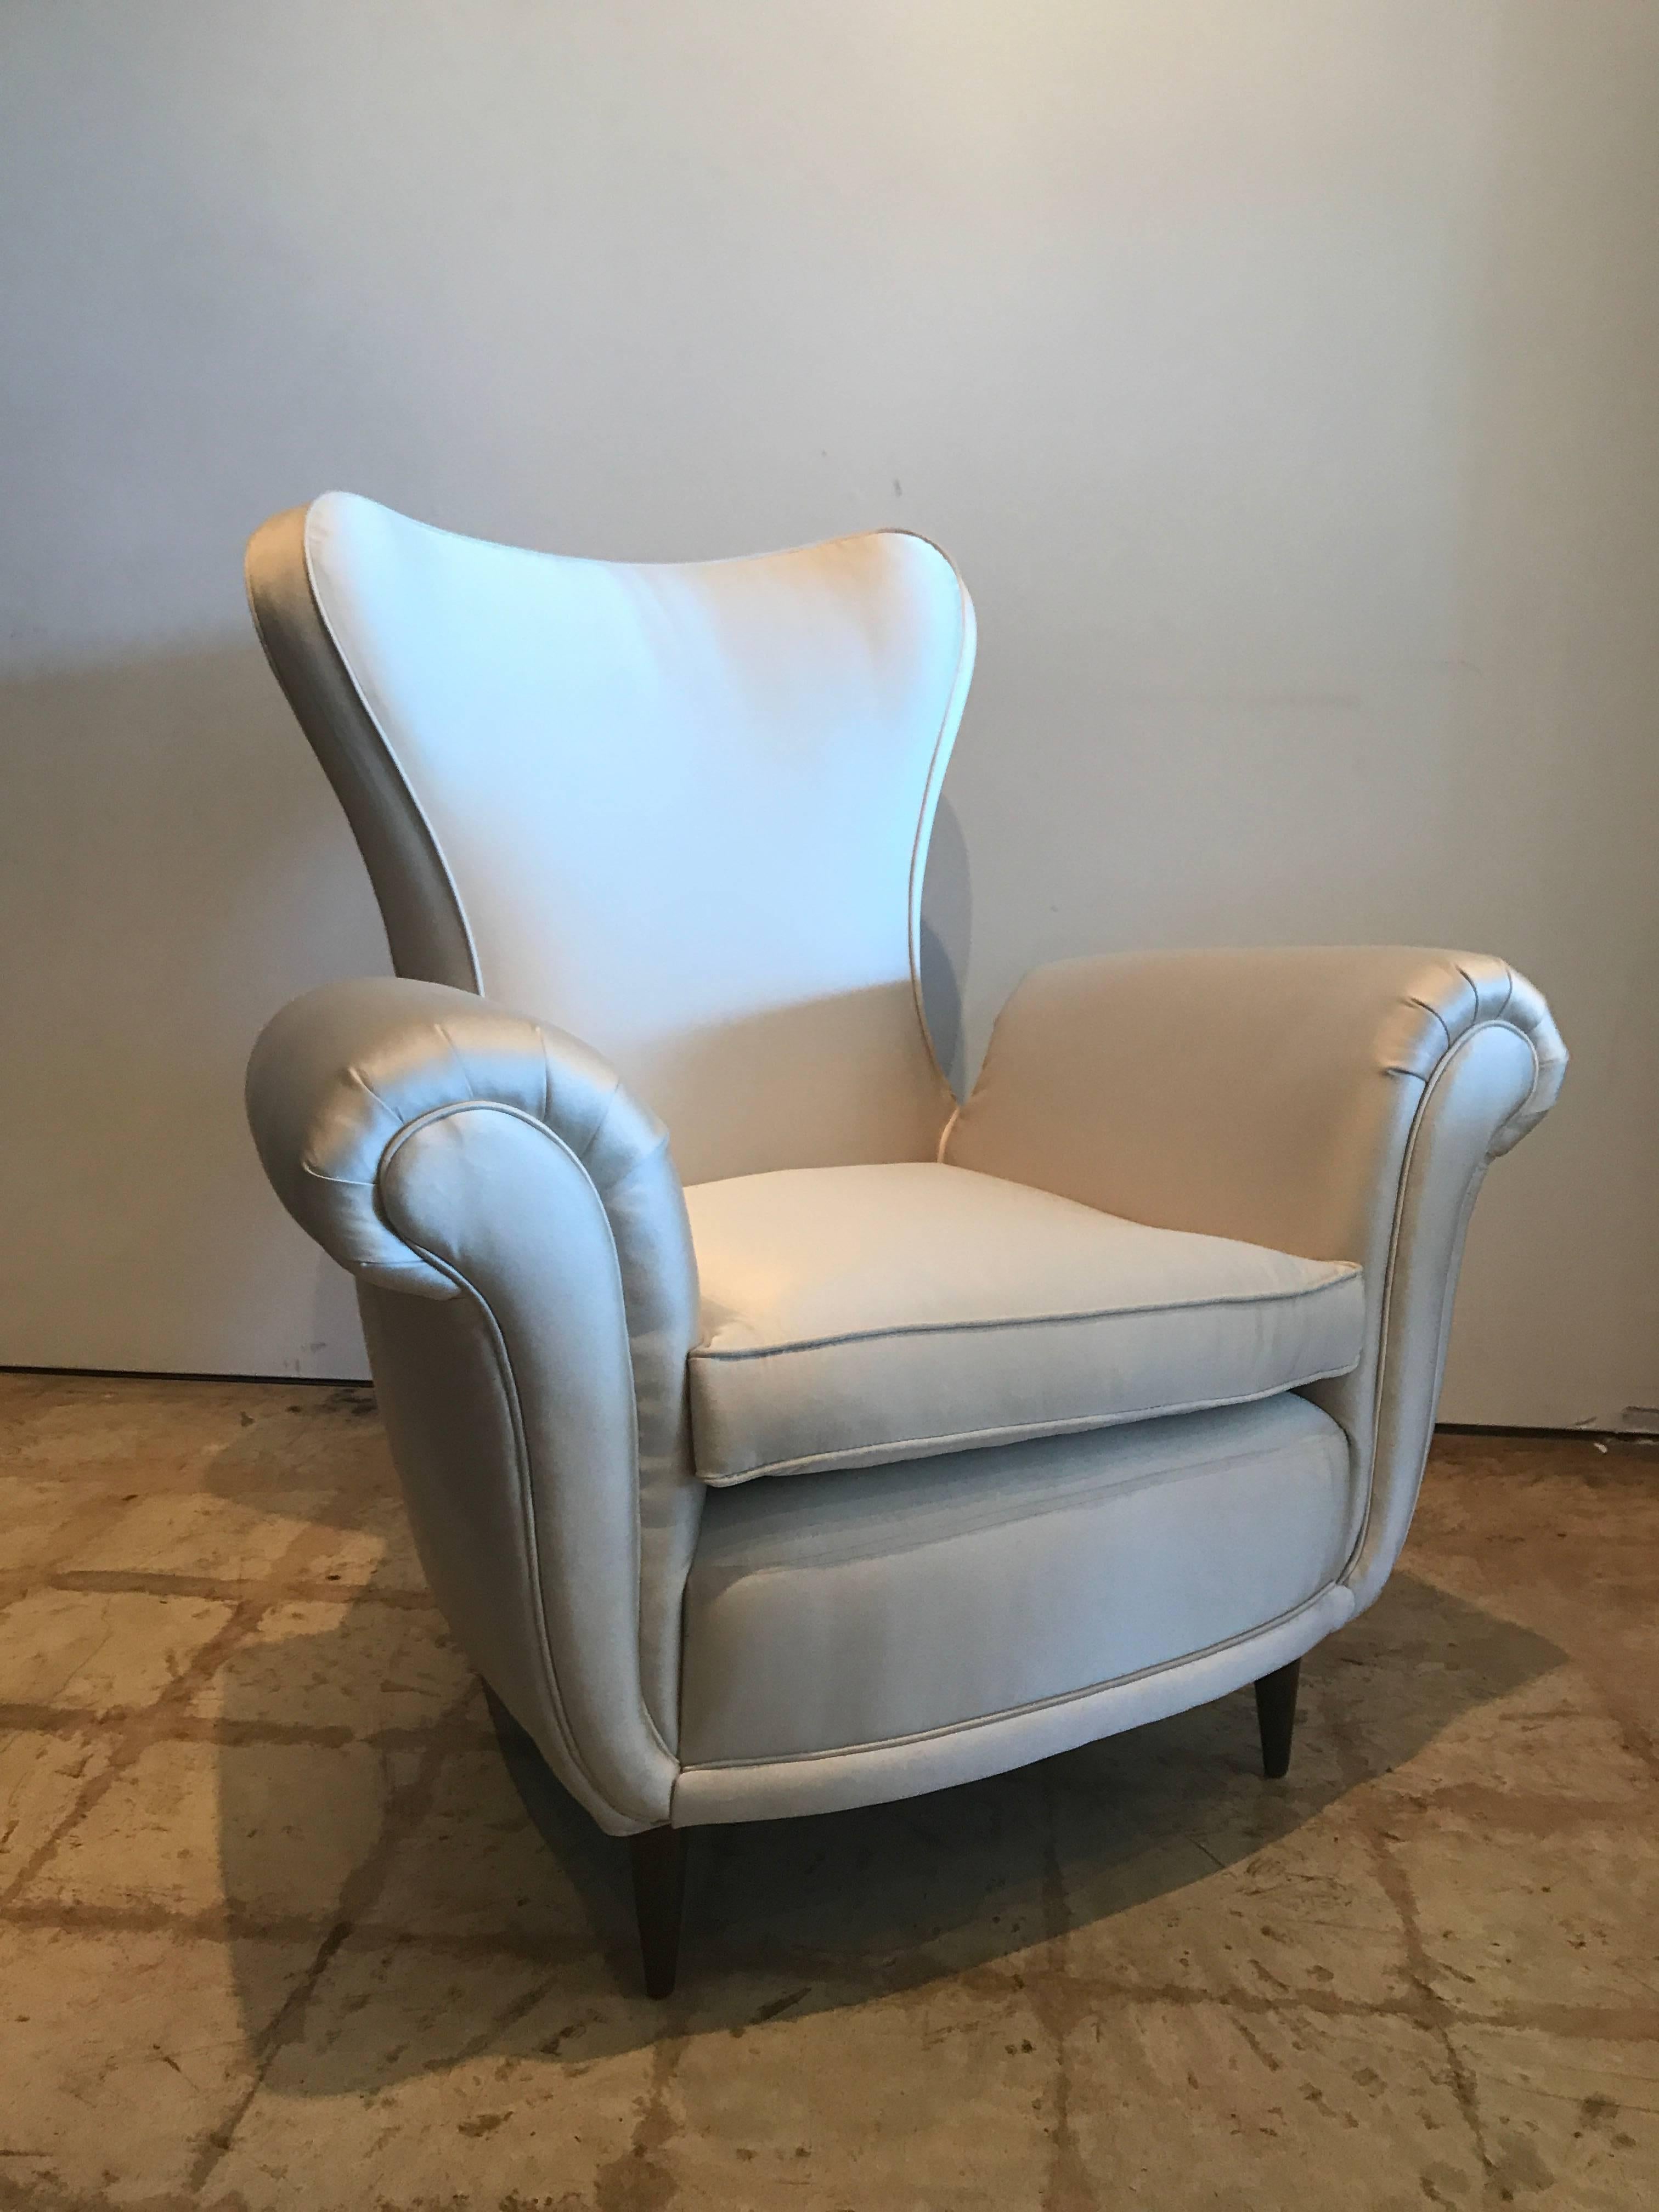 Italian Modern Upholstered Scrolled Arm Occasional Chair, Paolo Buffa, 1950's In Excellent Condition For Sale In Hollywood, FL